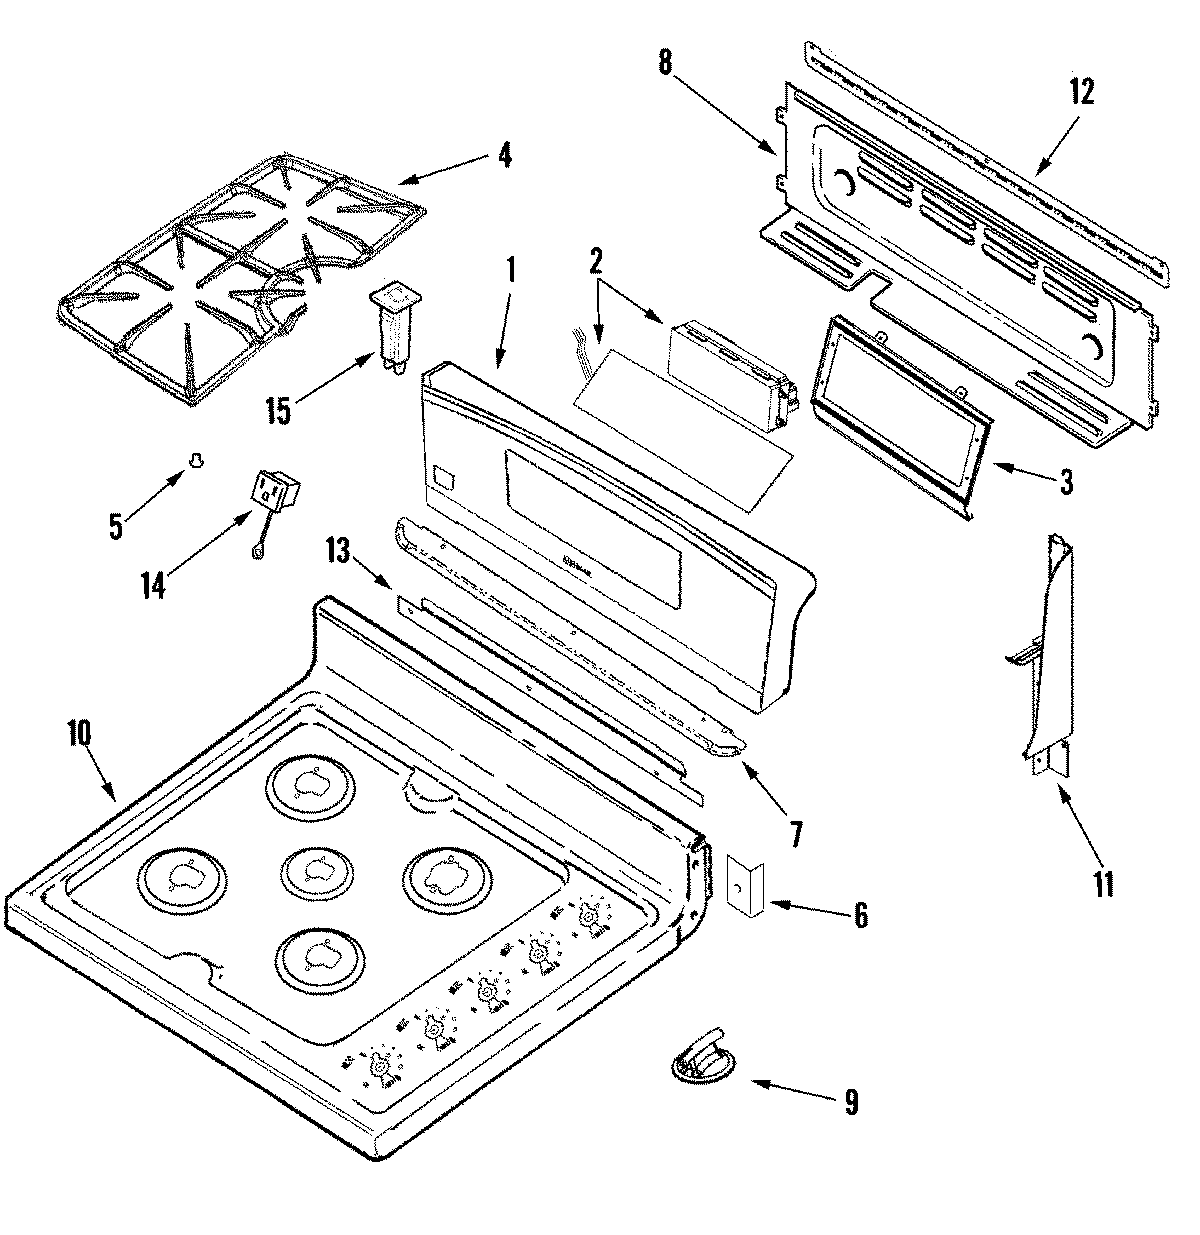 02 - CONTROL PANEL/TOP ASSEMBLY